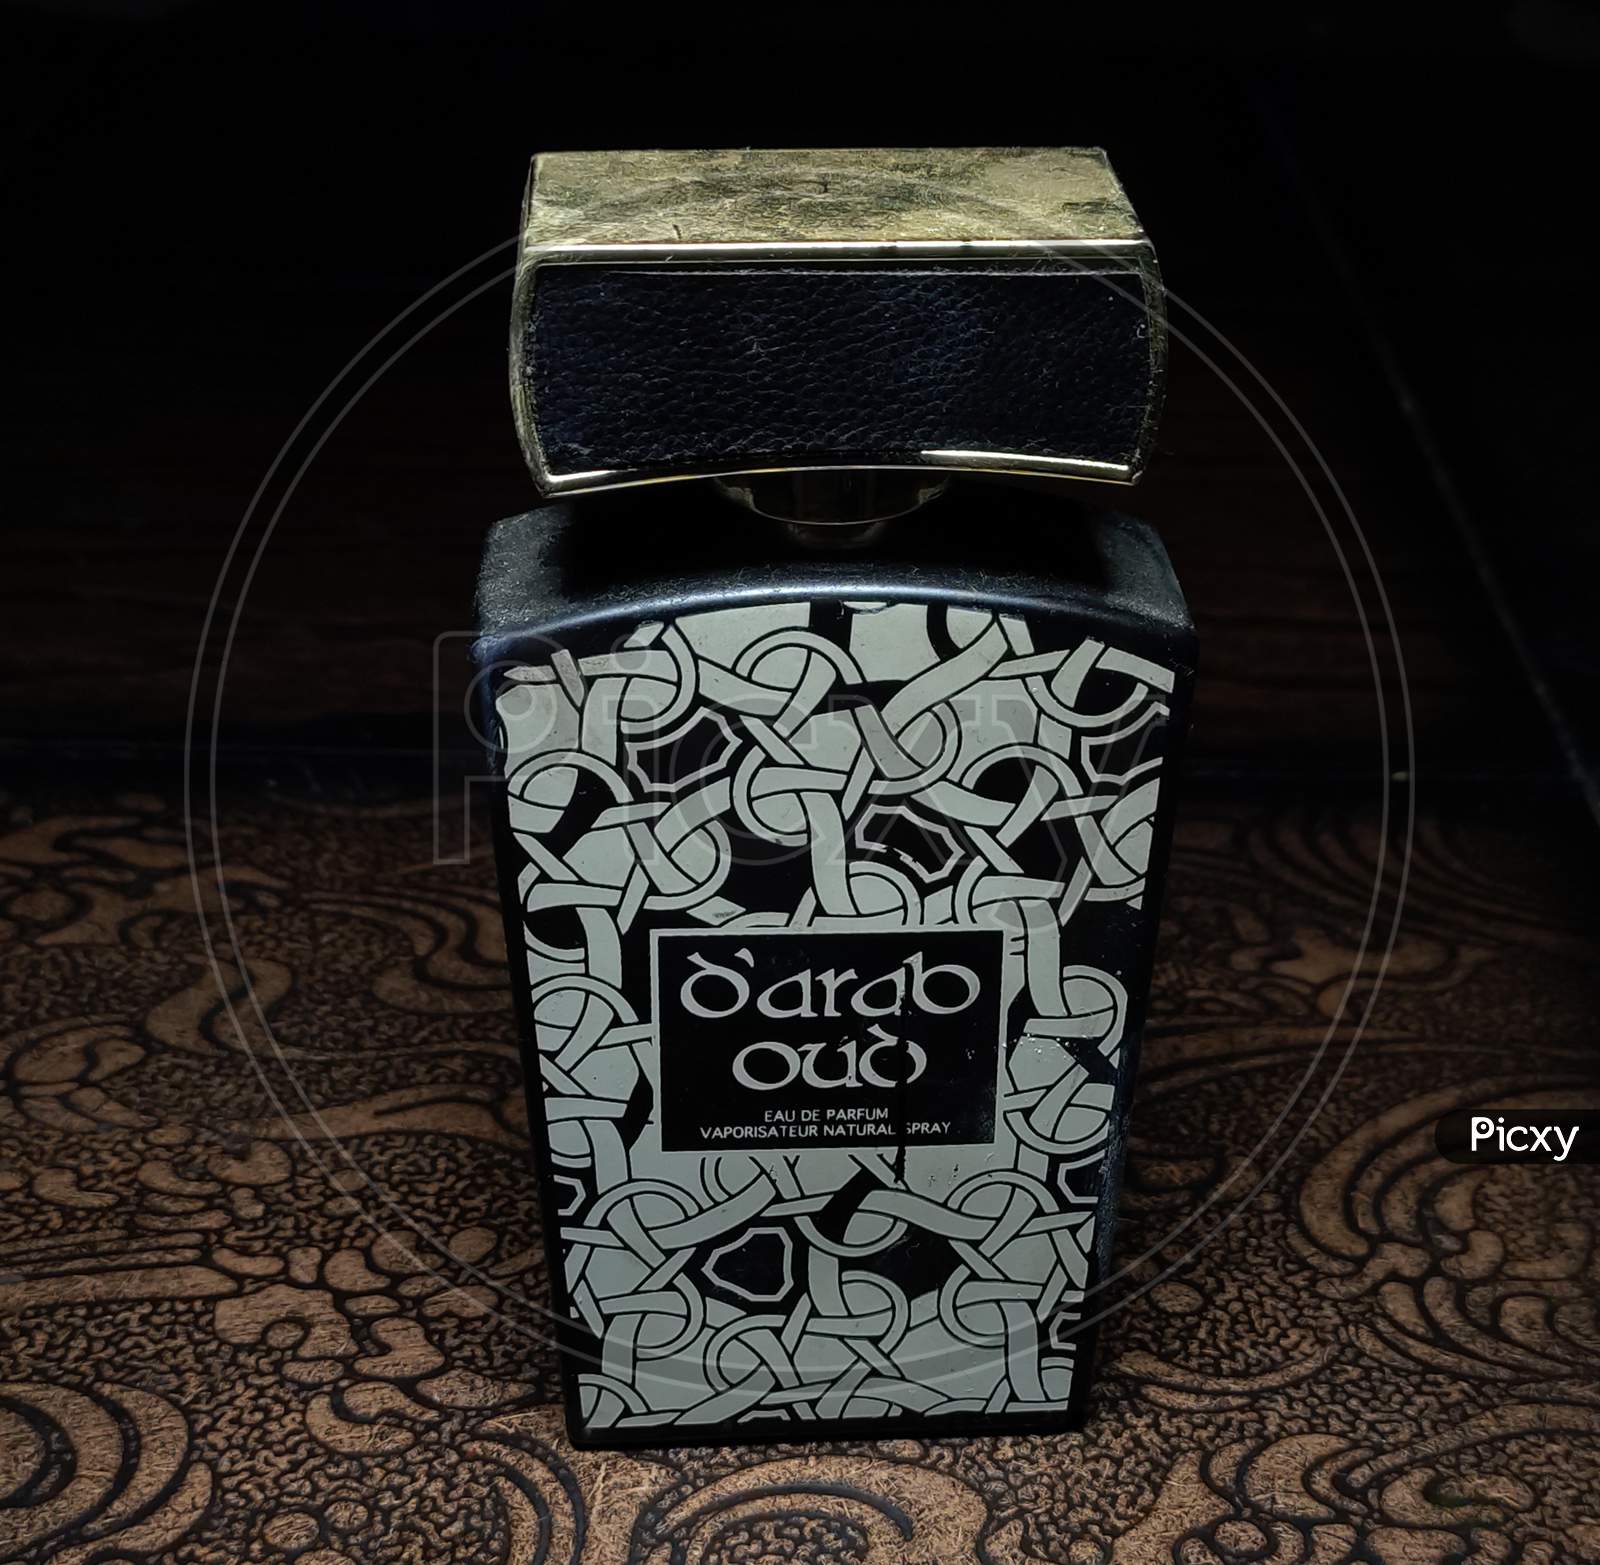 Beautiful perfume bottle on a Wodden table and black background